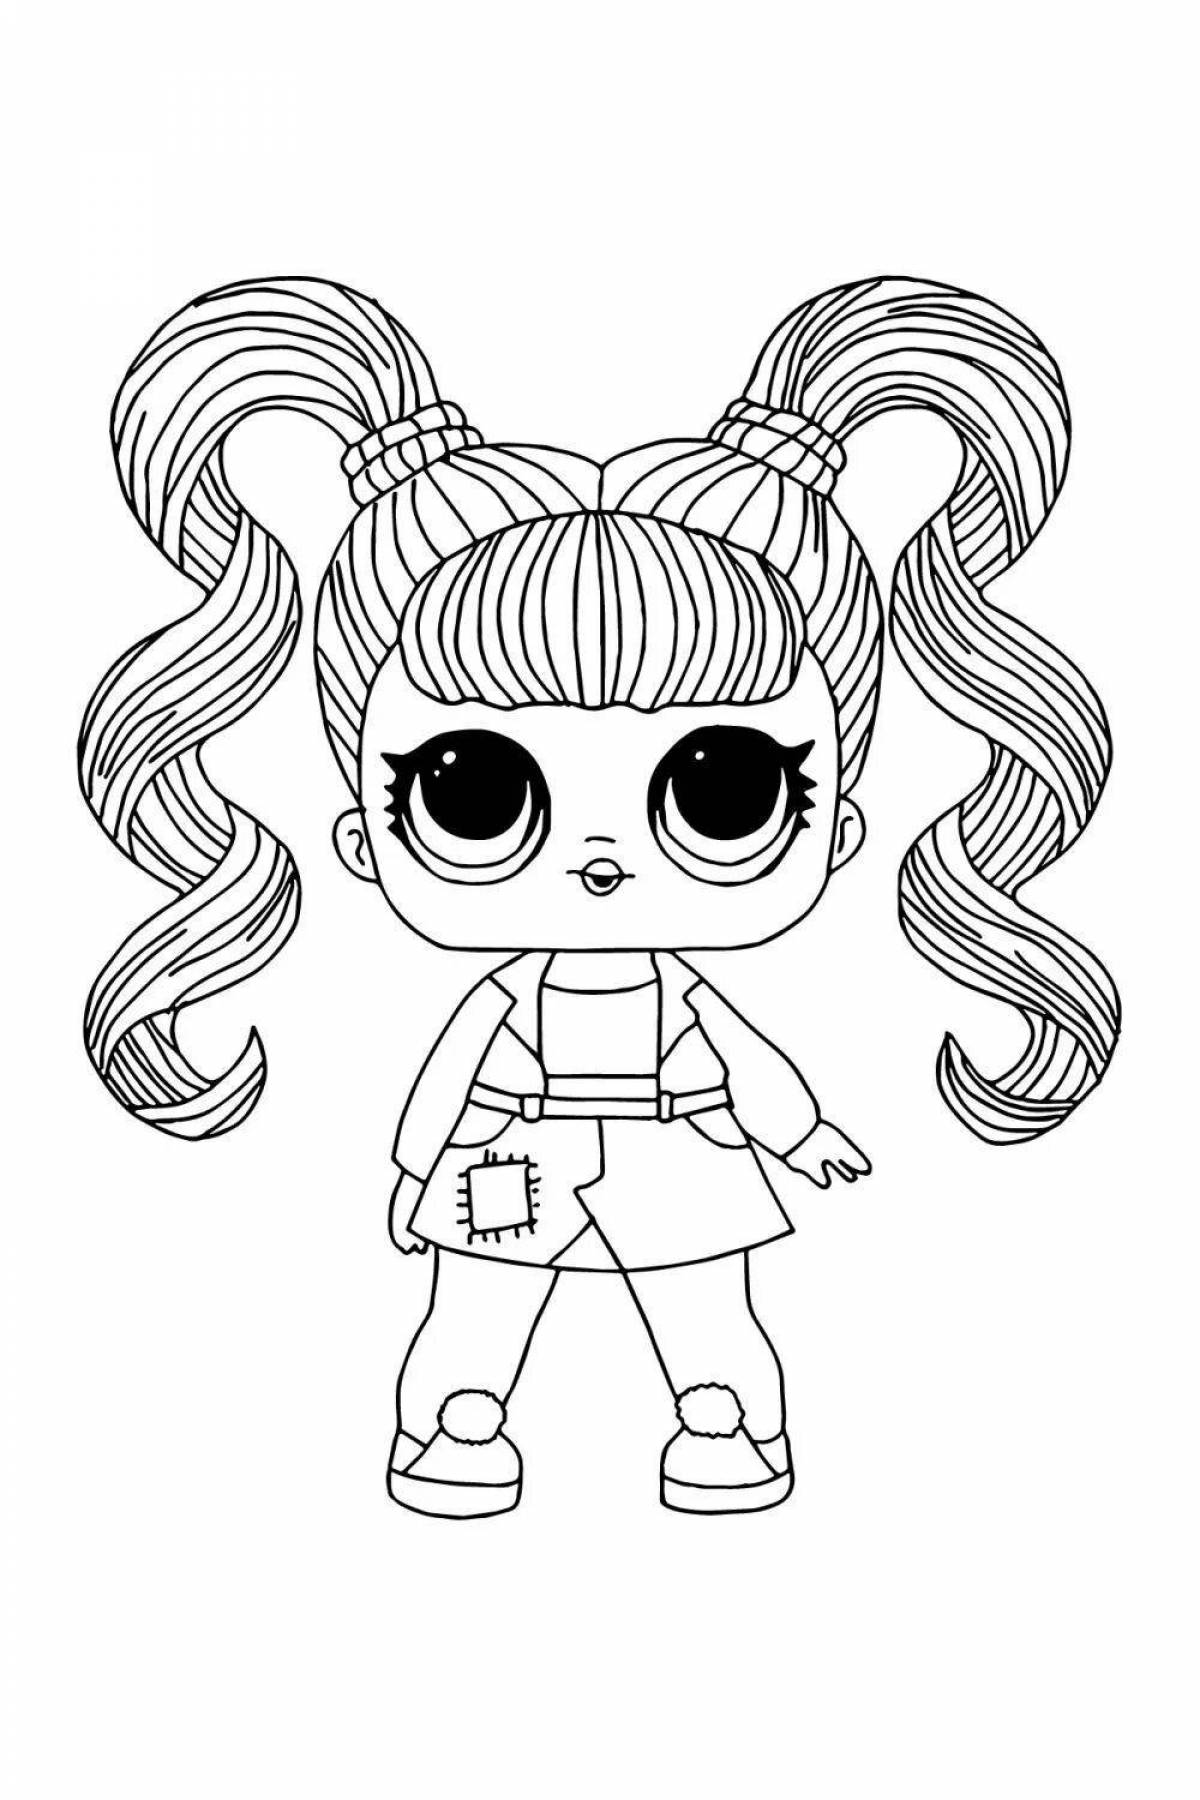 Funny lol dolls coloring book